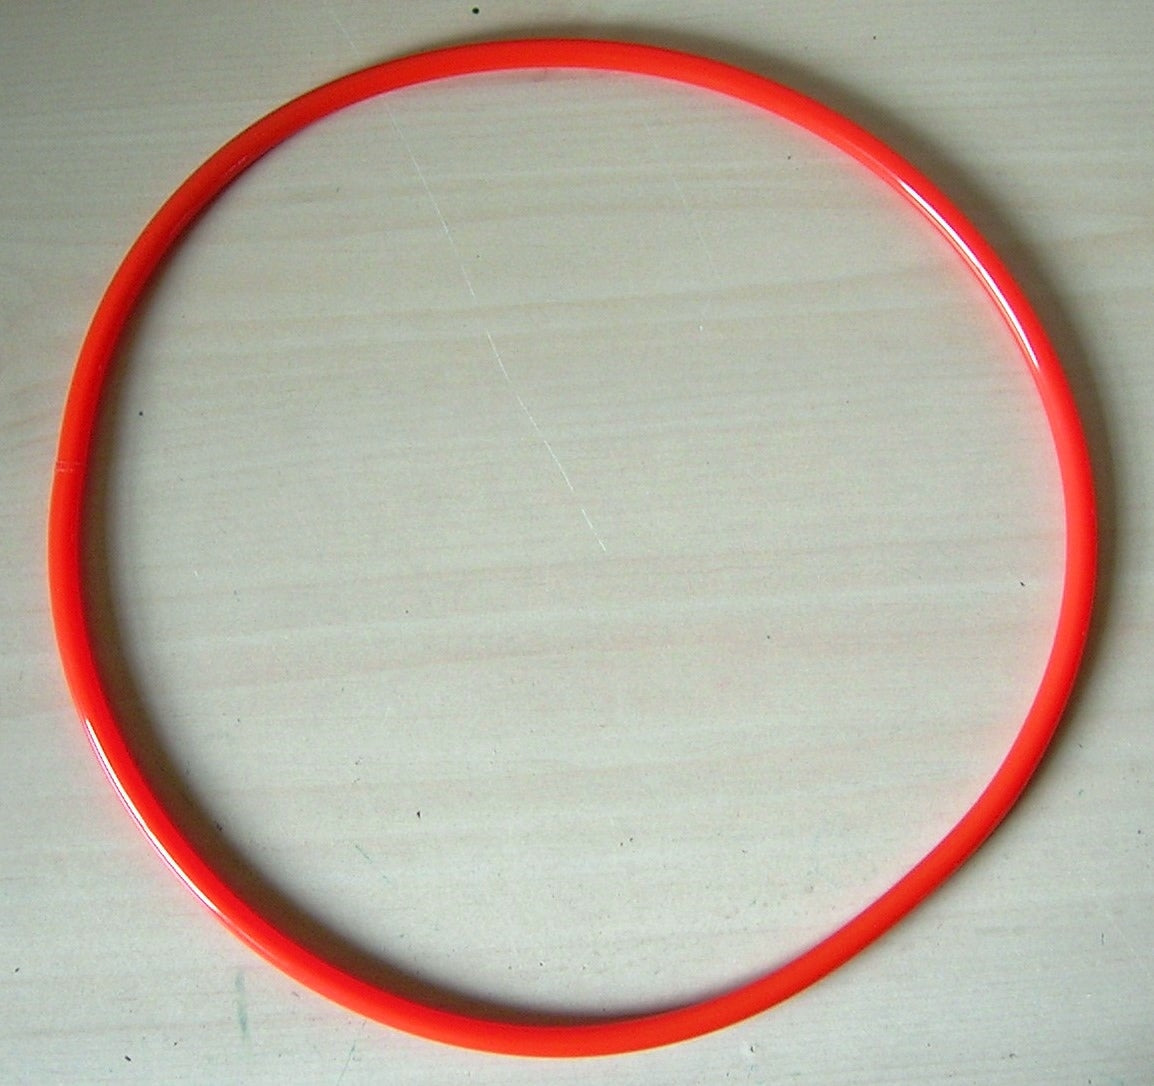 1/4" ROUND DRIVE BELT FOR SHERLINE BS360 Lathe